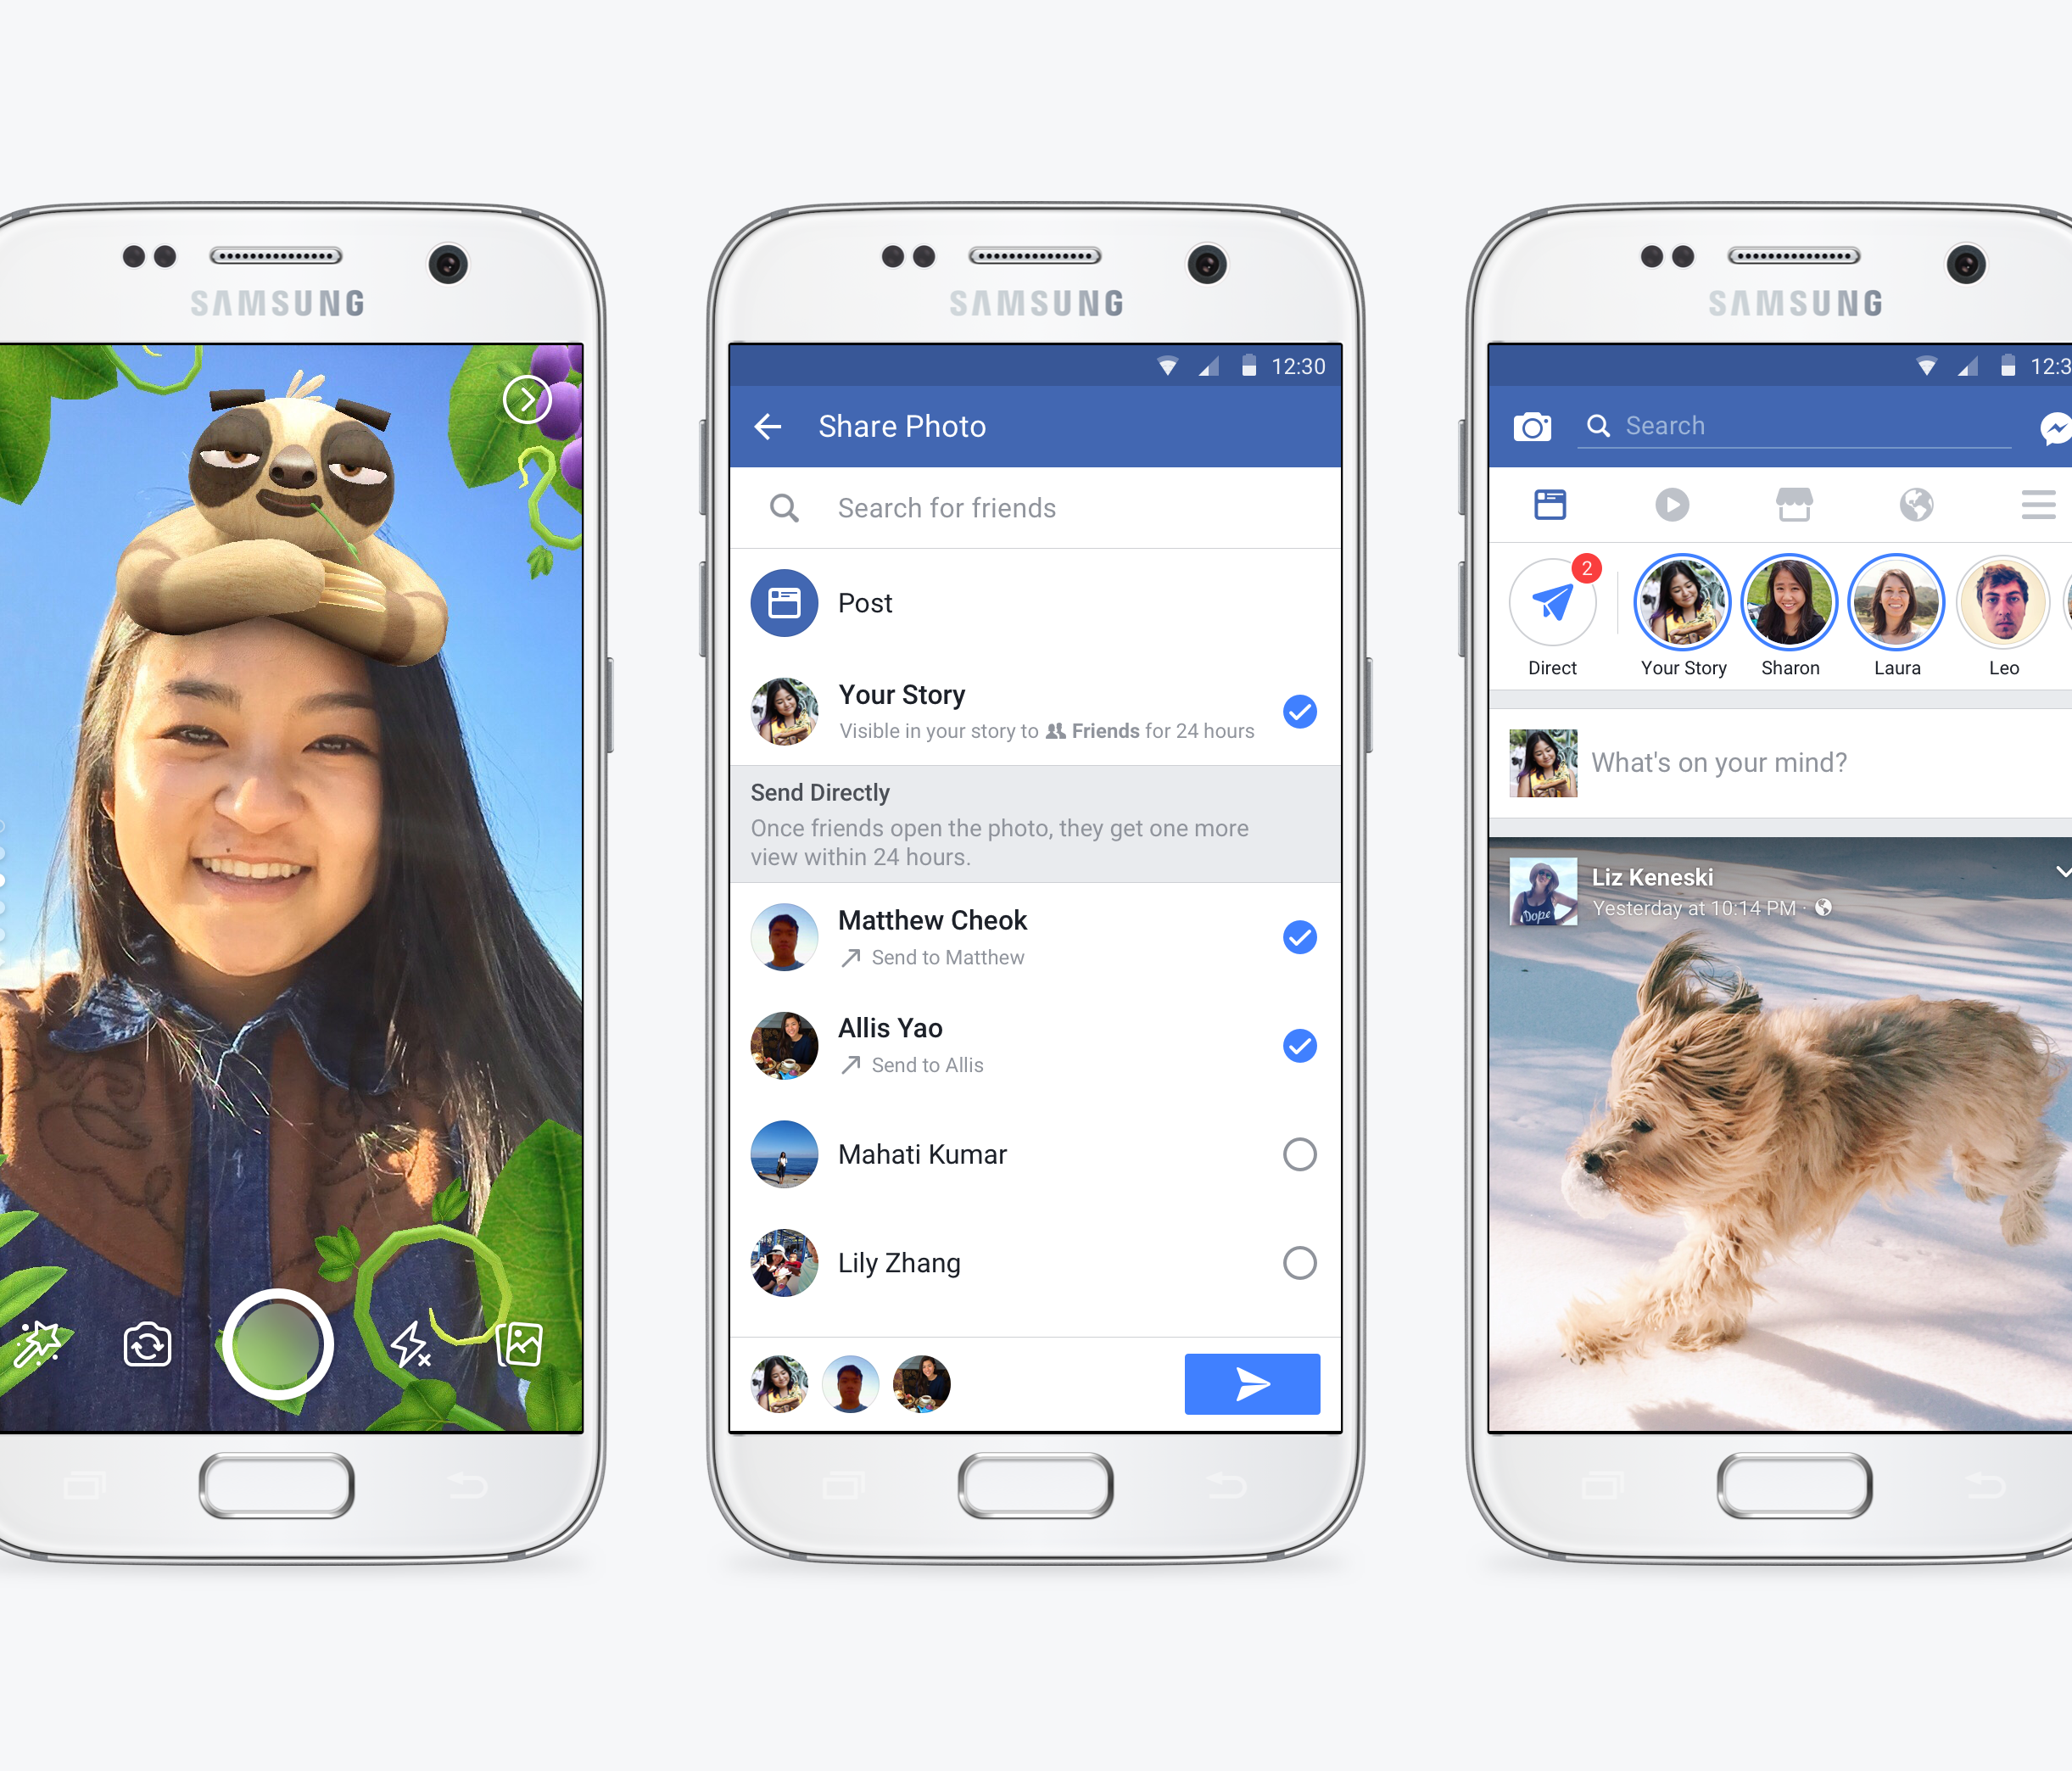 Facebook on Tuesday began rolling out Stories, which encourages people to share photos and videos with friends that vanish after 24 hours.   It also debuted a slew of new camera effects.